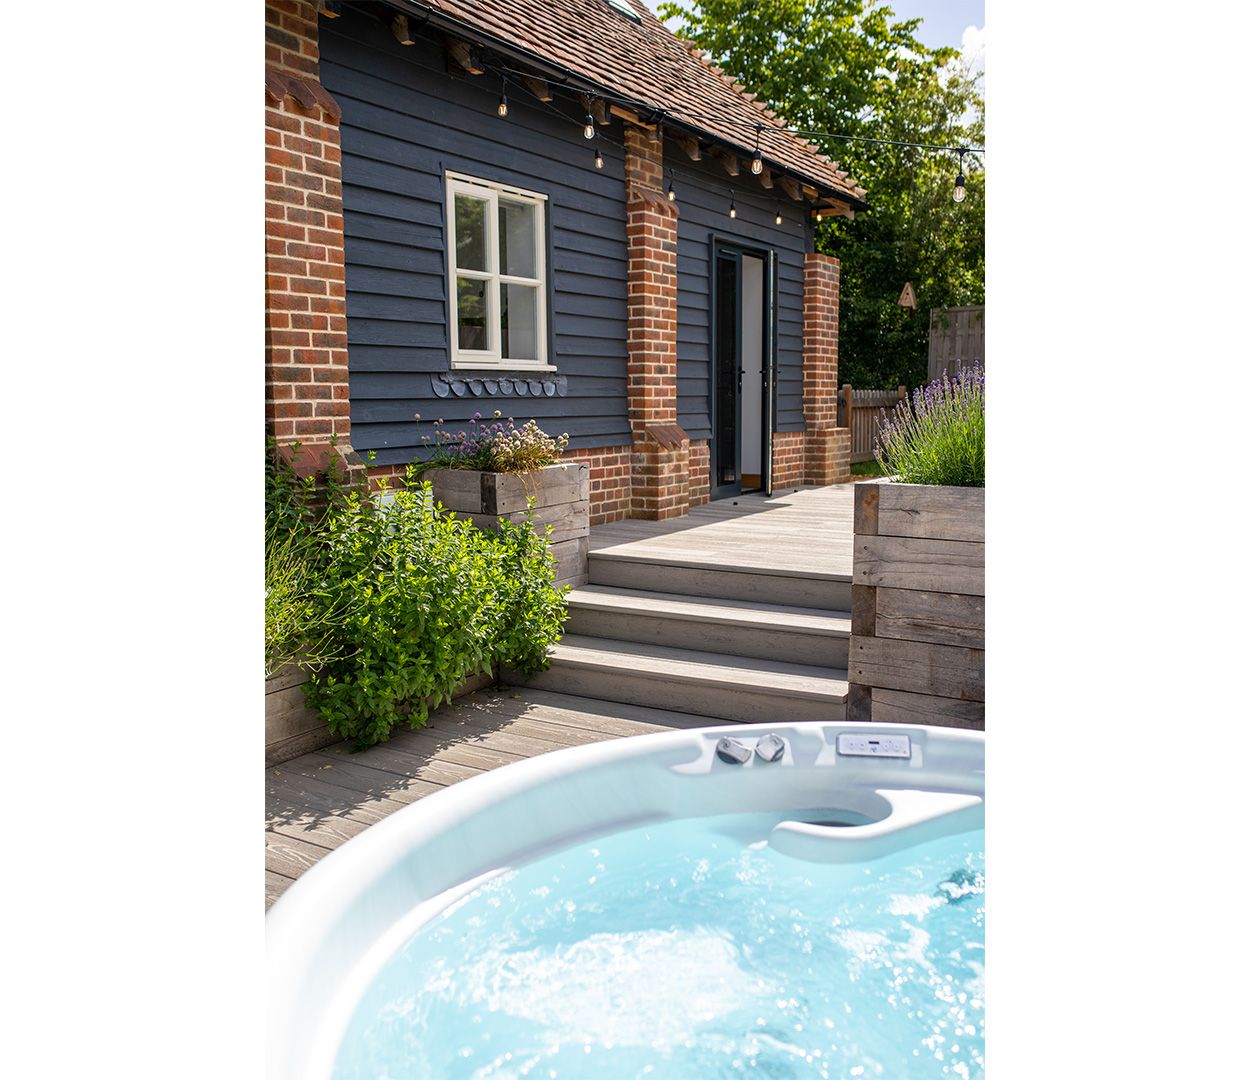 Make more of the outdoors with Cladco Premium PVC Decking Boards